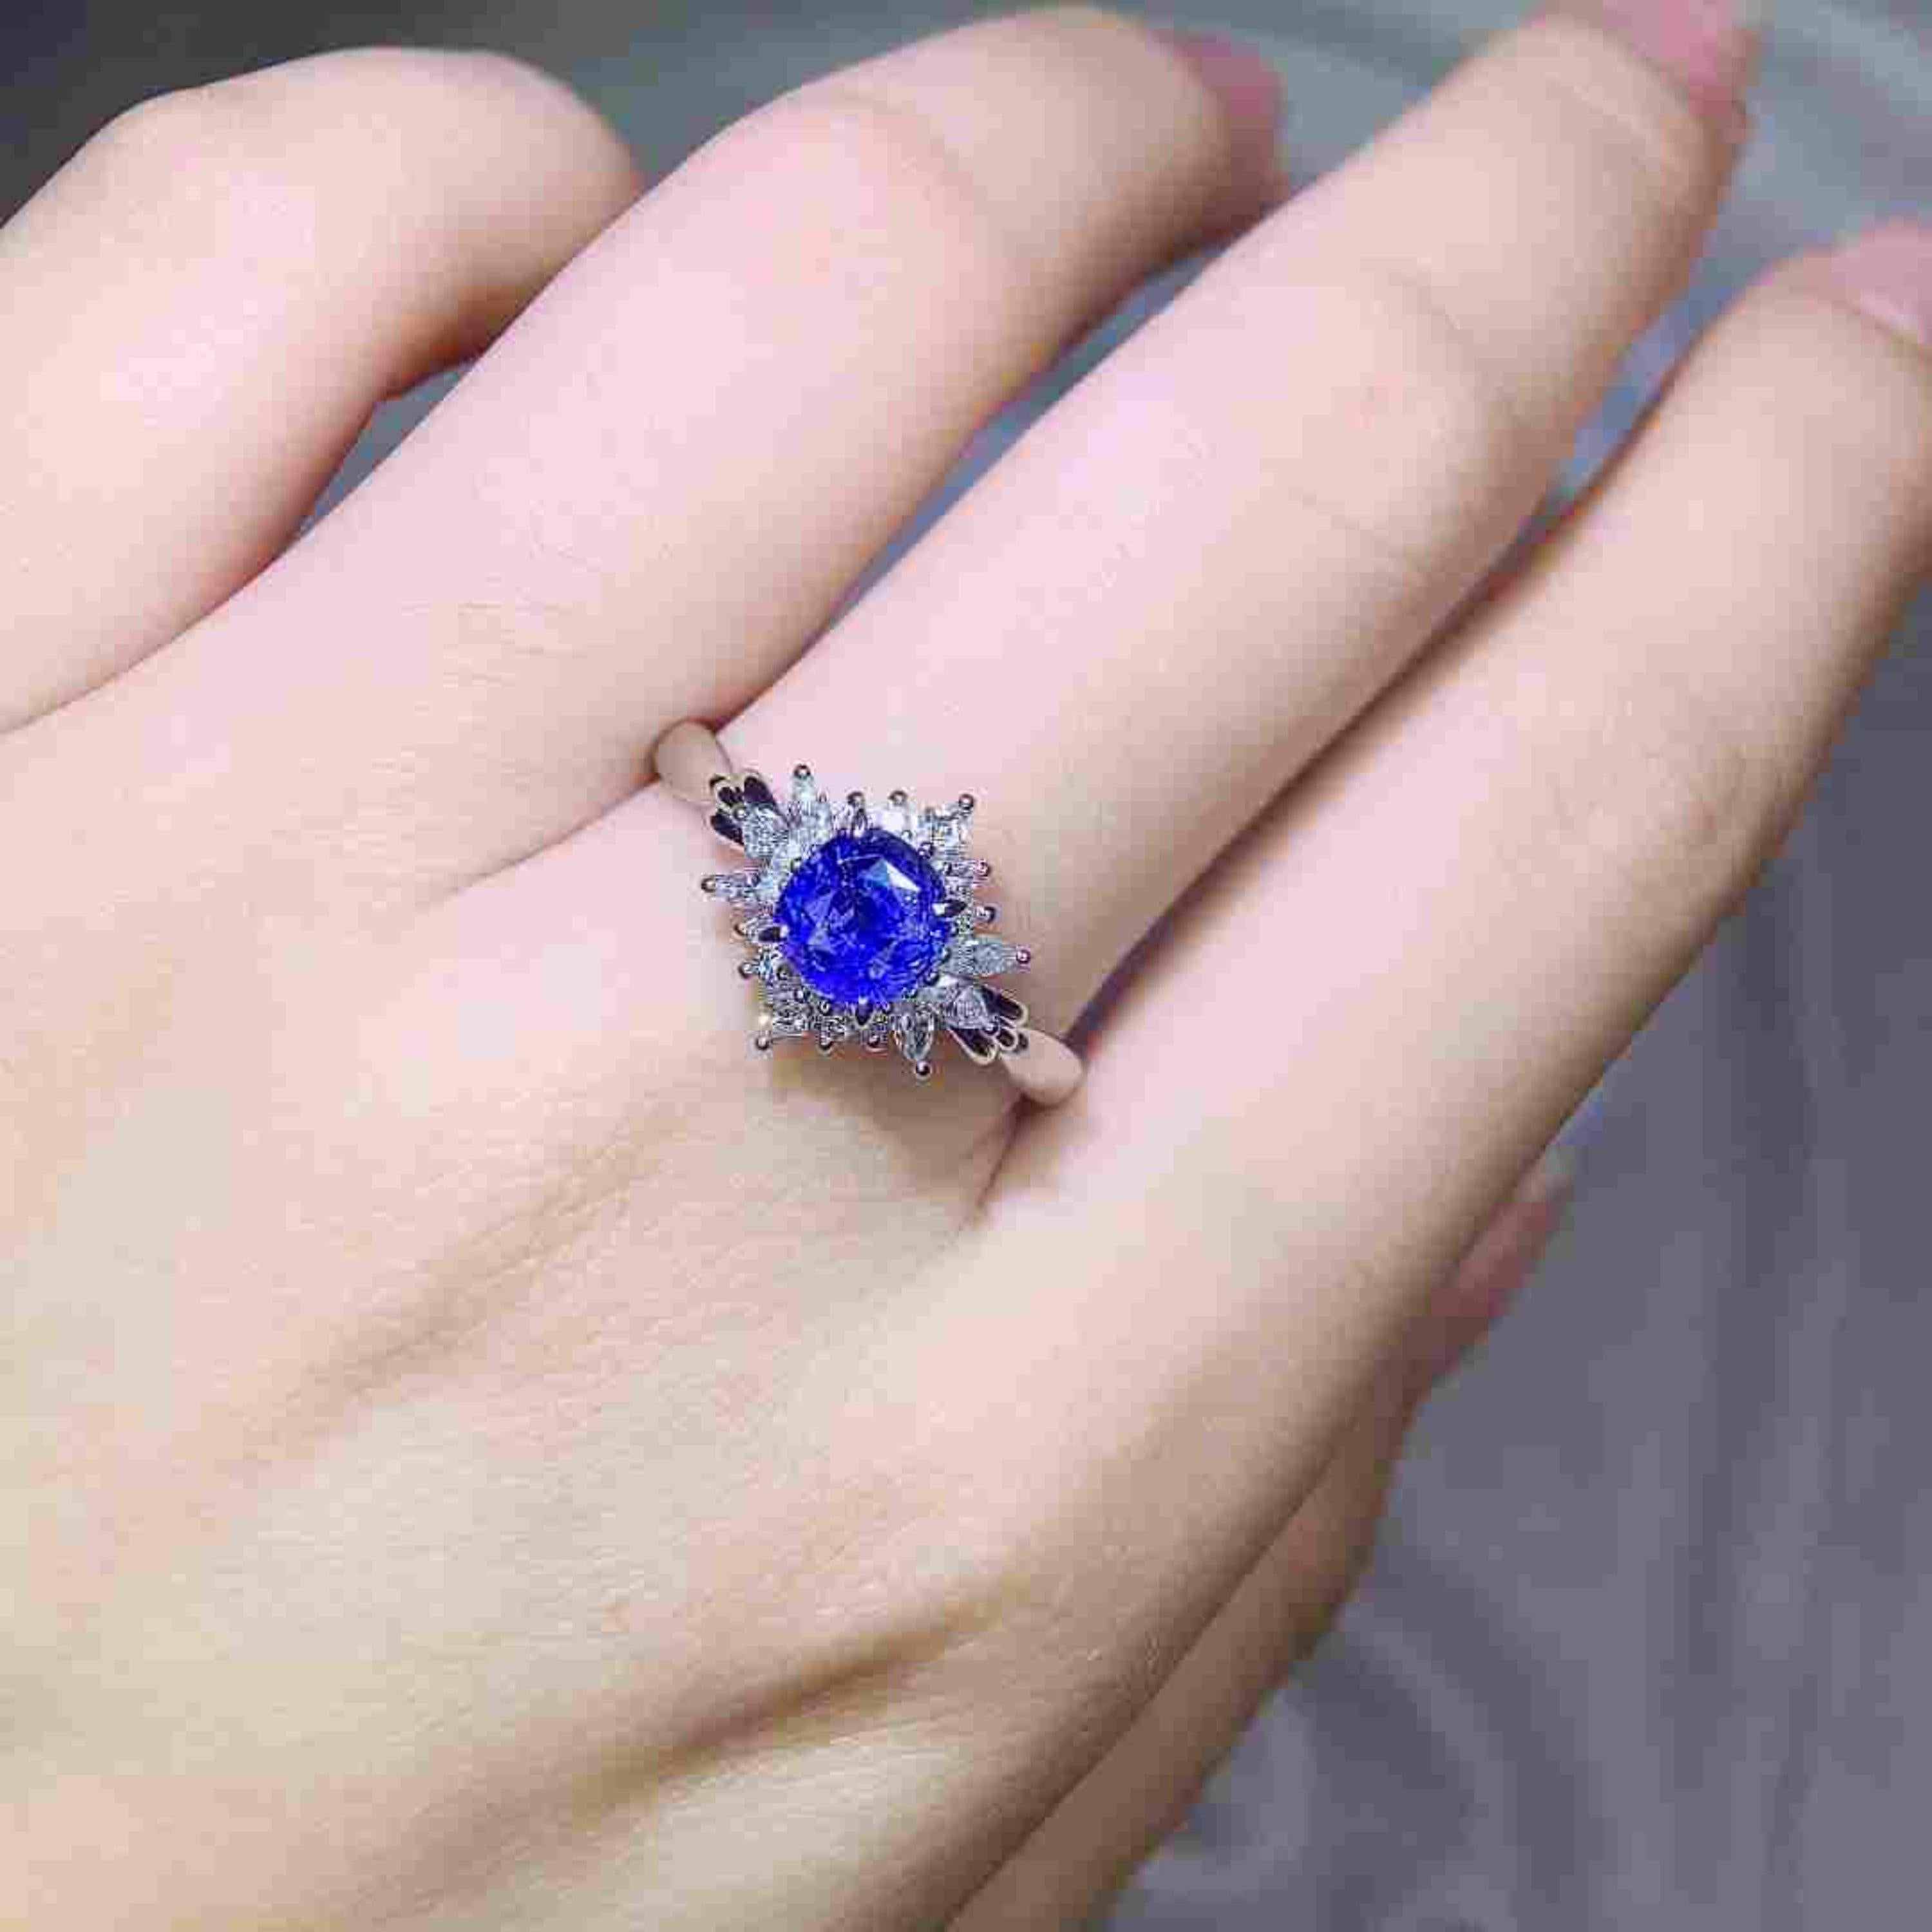 For Sale:  Vintage Sapphire Engagement Ring, Antique Natural Sapphire Wedding Ring 4